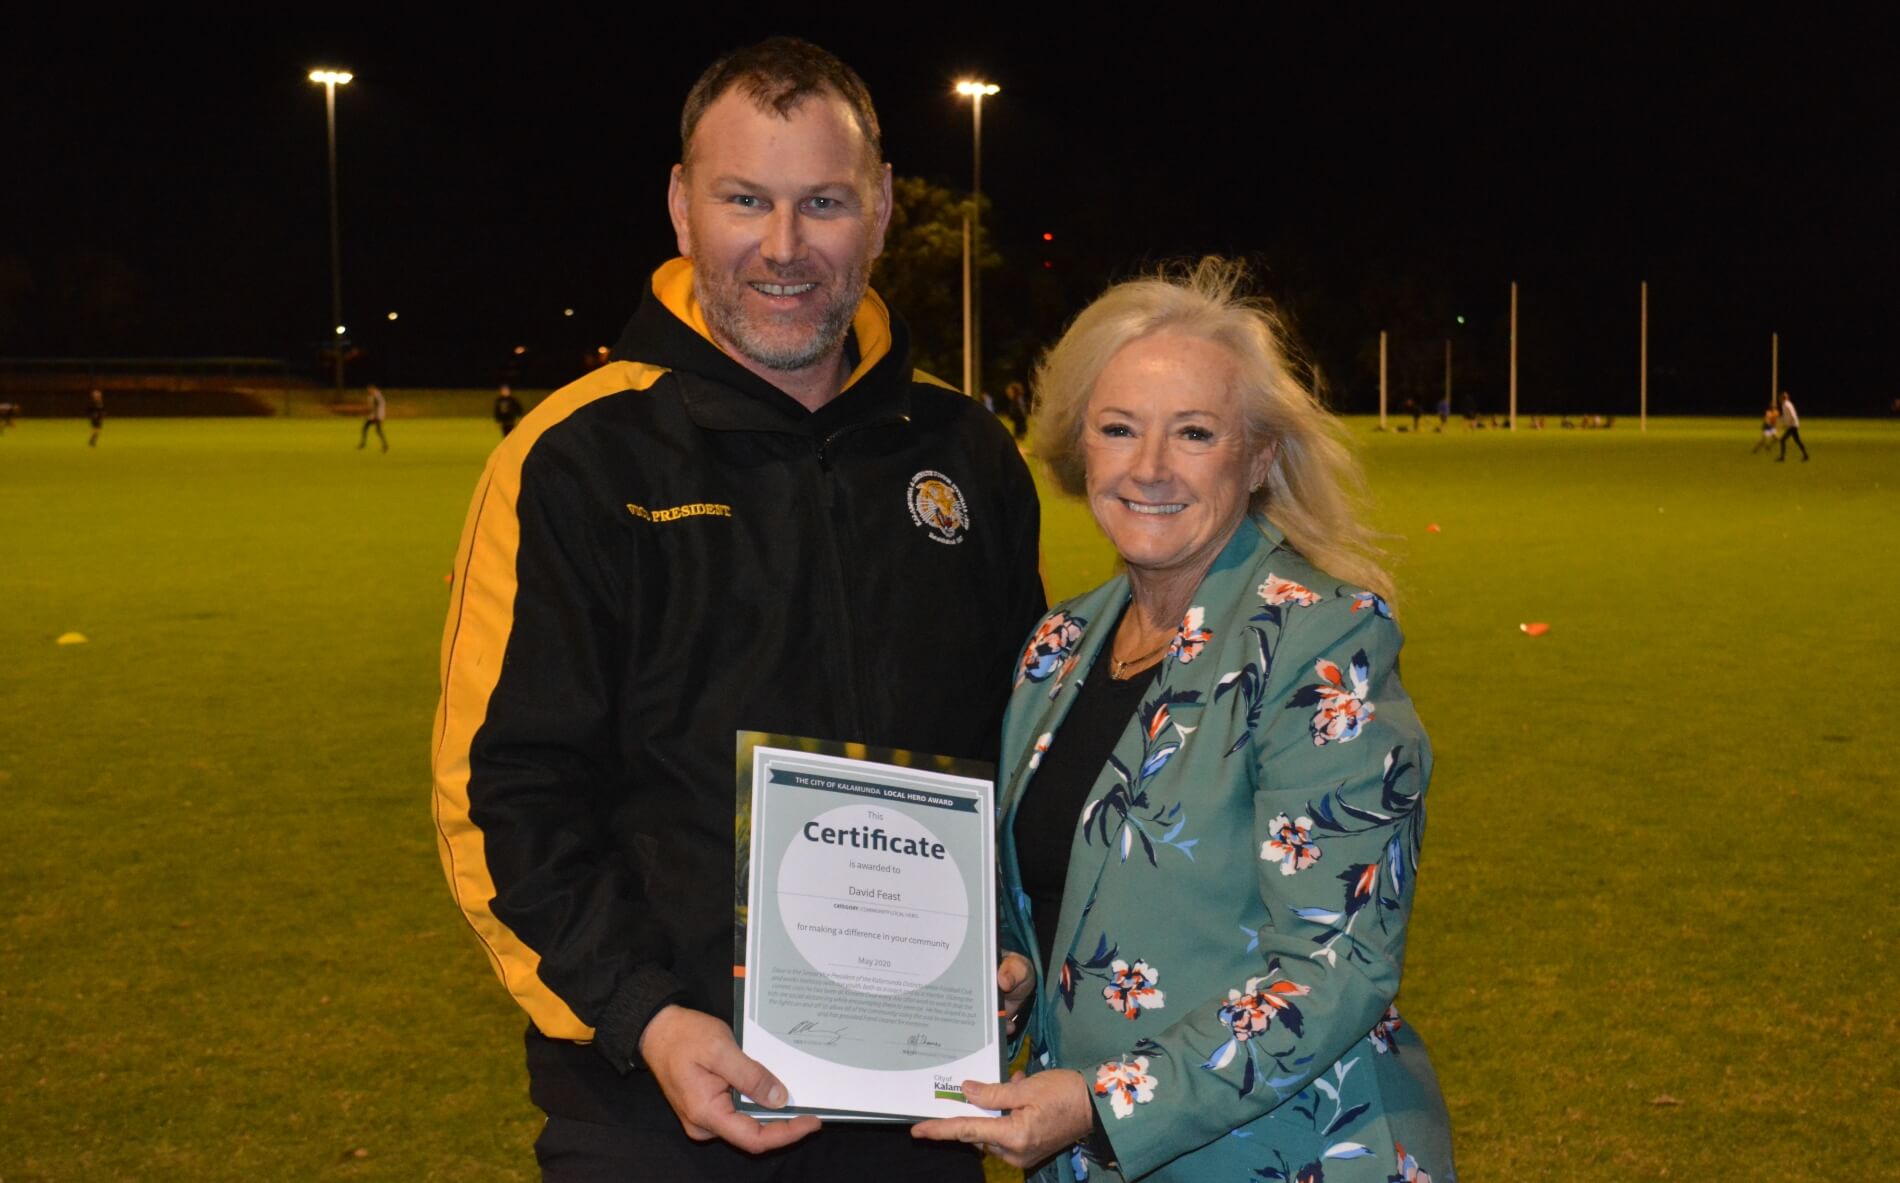 Dave Feast presented by Mayor Margaret Thomas the Local Hero nomination for May 2020 